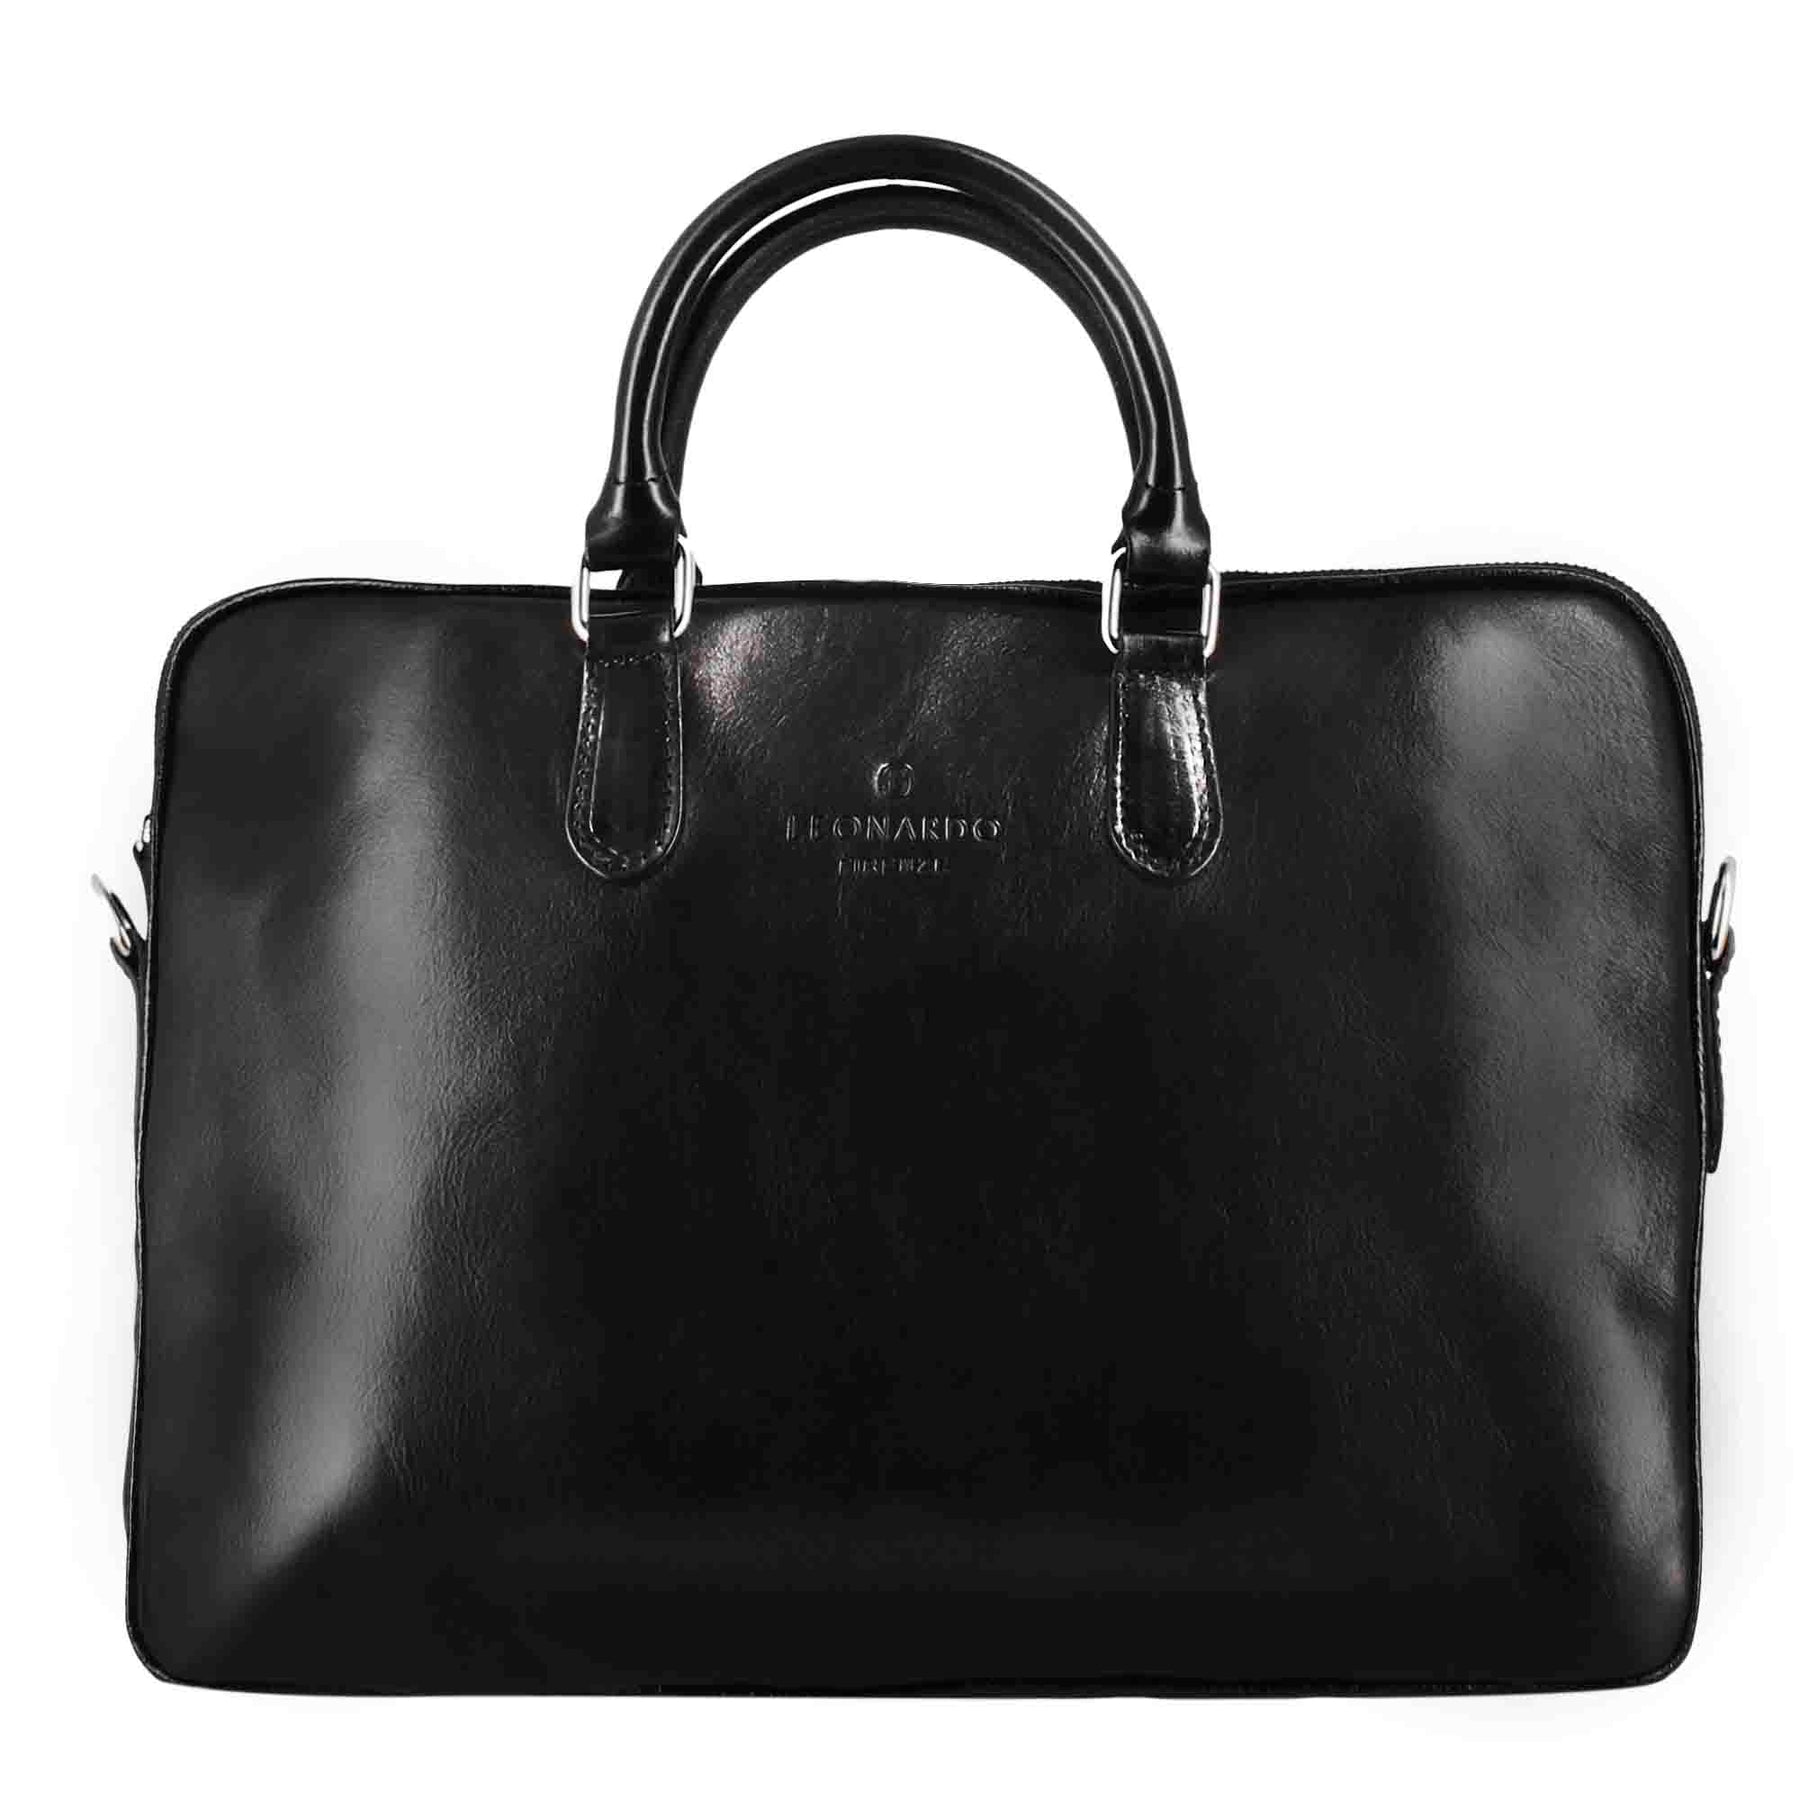 Professional leather briefcase with removable black shoulder strap